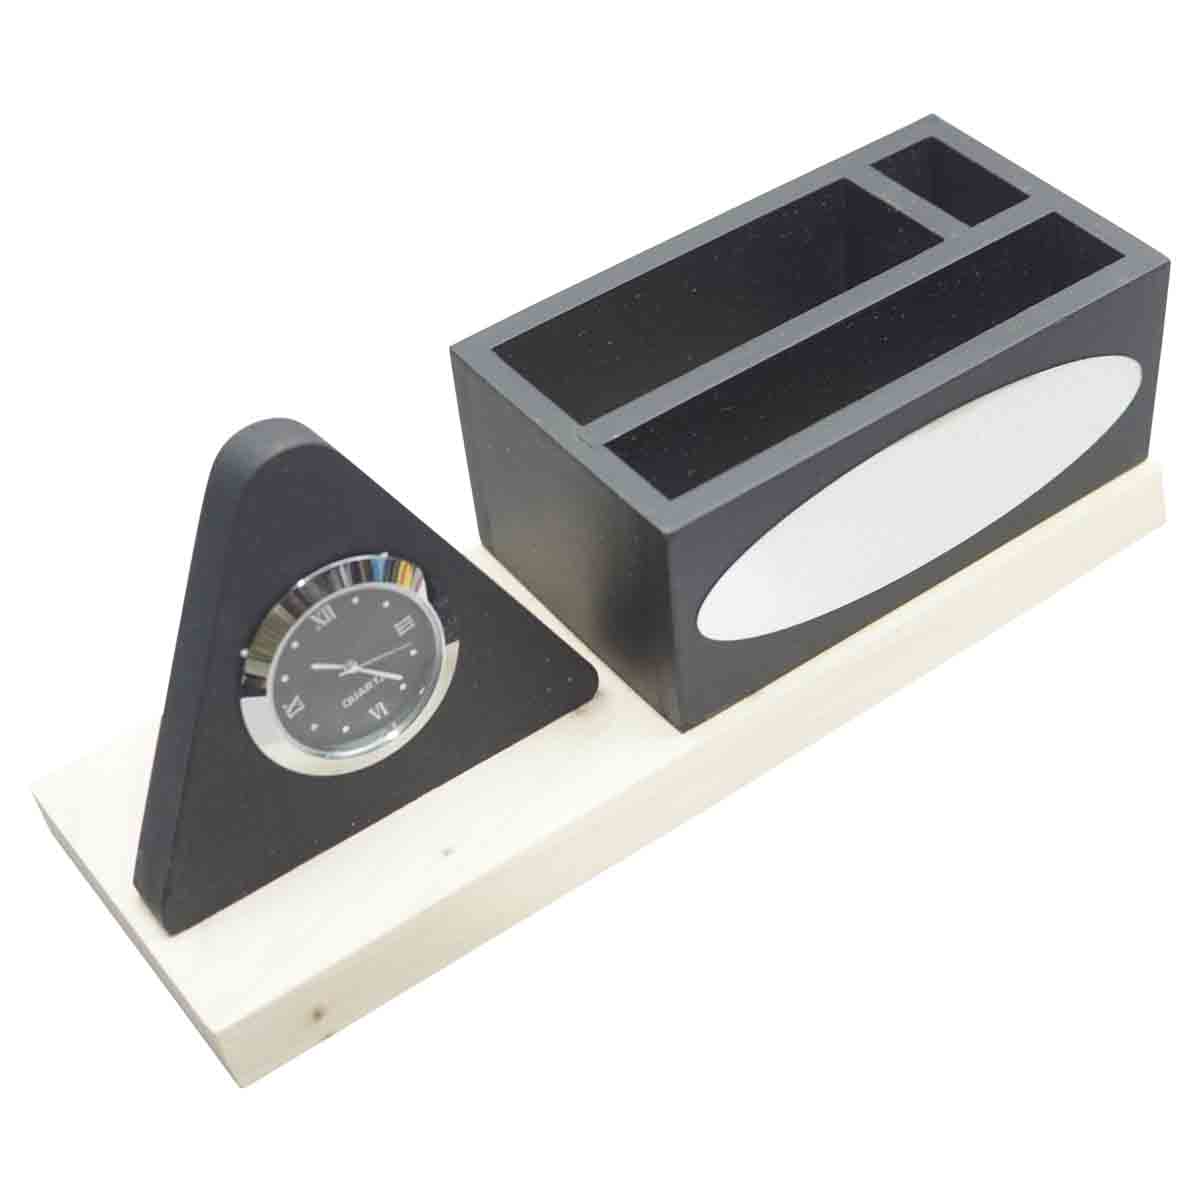 Perfect Place To Keep Your Business Cards - Visiting Card Holder | Winni.in